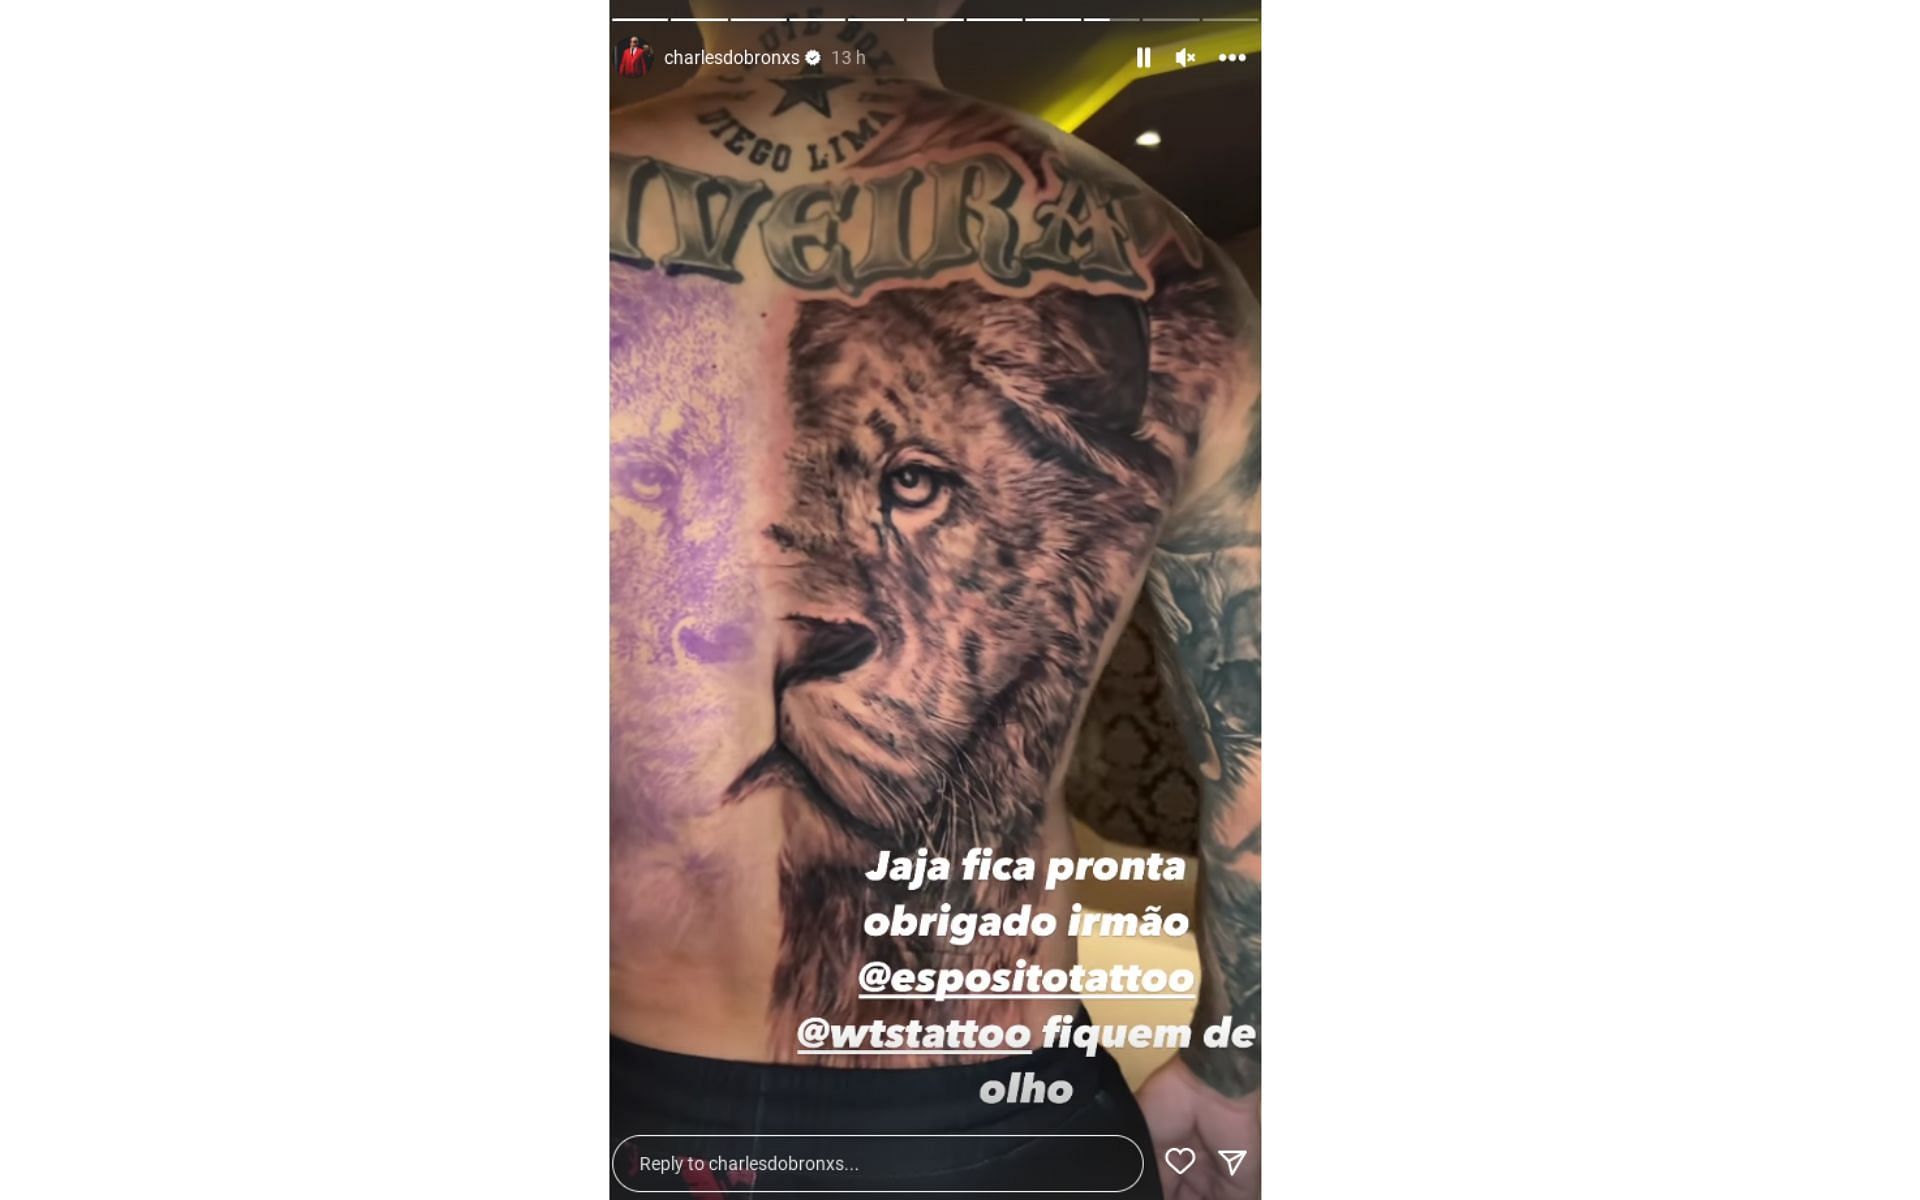 What Is the Meaning of Charles Oliveira's Back Tattoo? Know